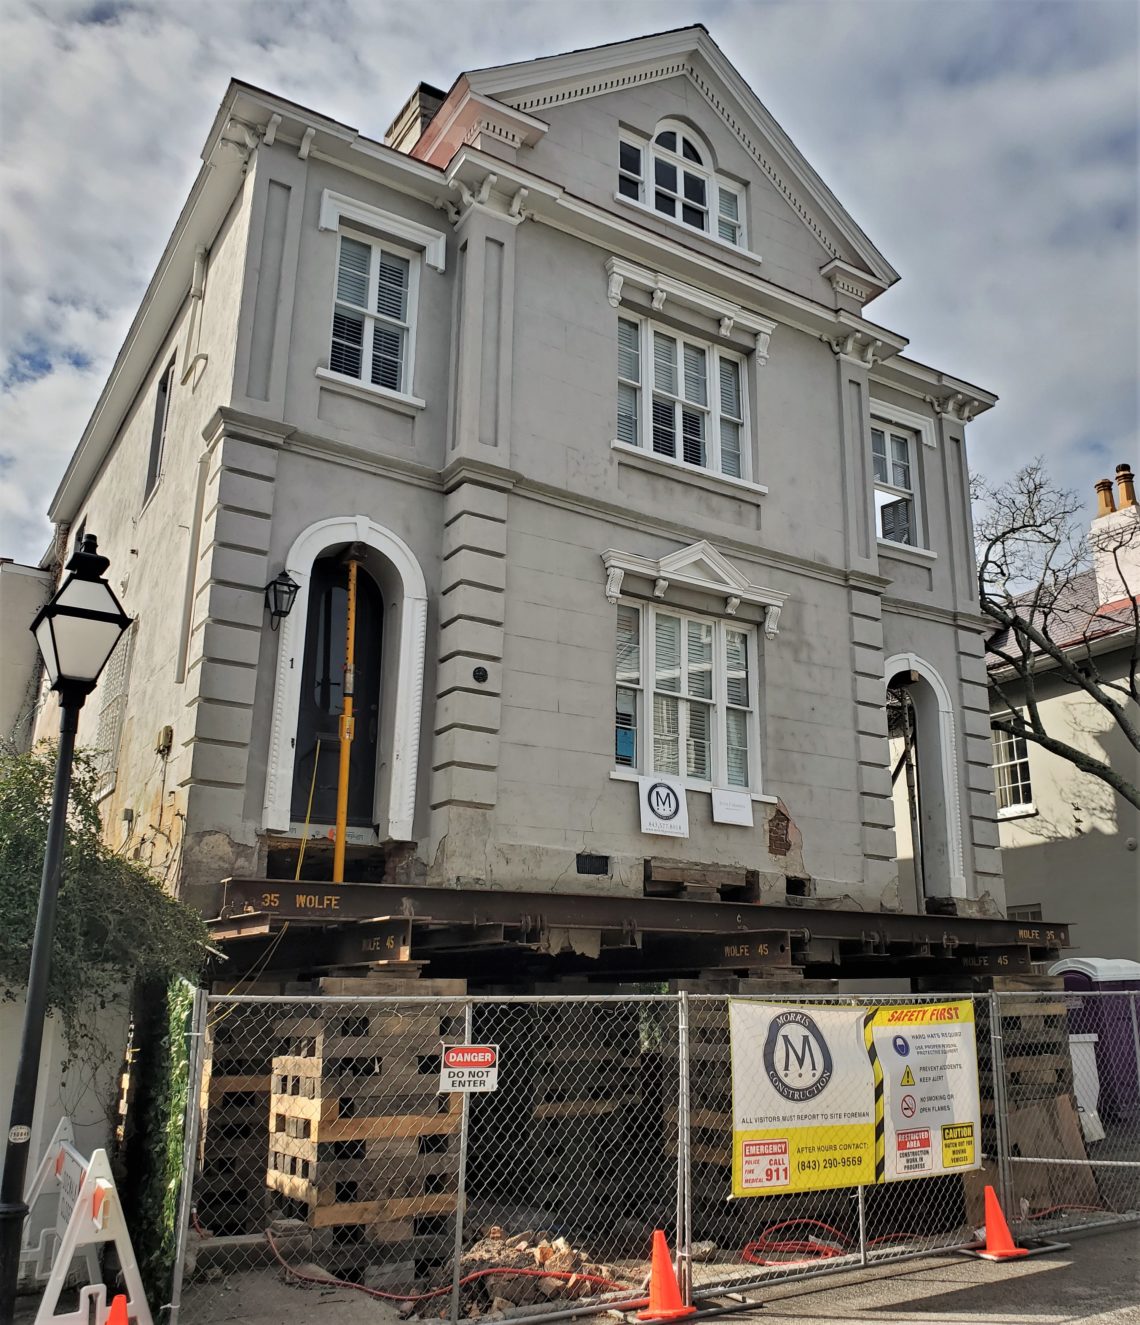 This house on Water Street has been sitting in the same spot since 1857. Now, because of flooding and rising sea levels, it and other houses around Charleston are being raised to make them safer from water. This is one of the most impressive I've seen so far.